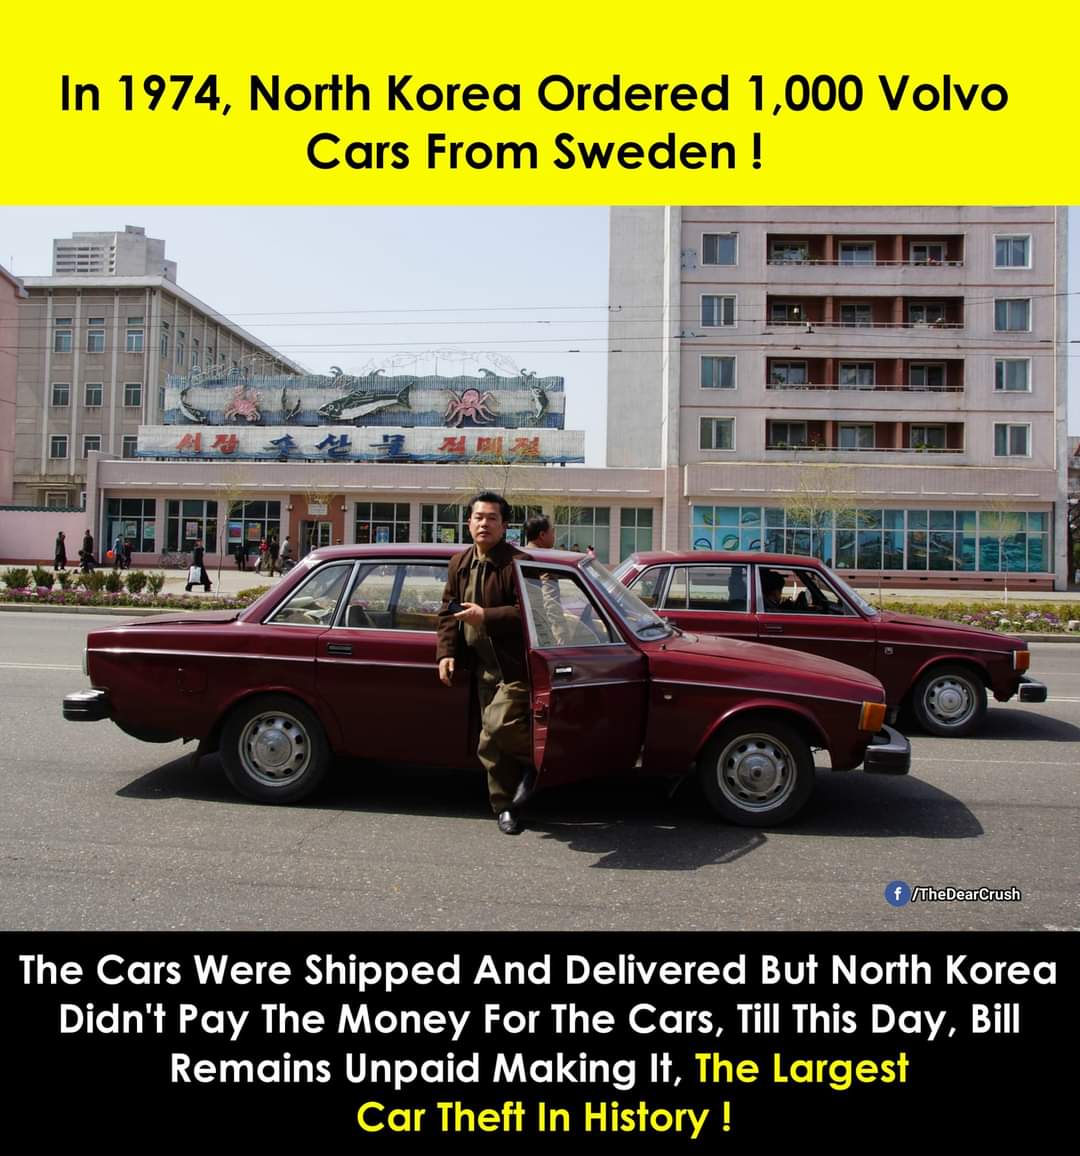 dank memes and pics - north korea volvo - In 1974, North Korea Ordered 1,000 Volvo Cars From Sweden! fTheDearCrush The Cars Were Shipped And Delivered But North Korea Didn't Pay The Money For The Cars, Till This Day, Bill Remains Unpaid Making It, The Lar